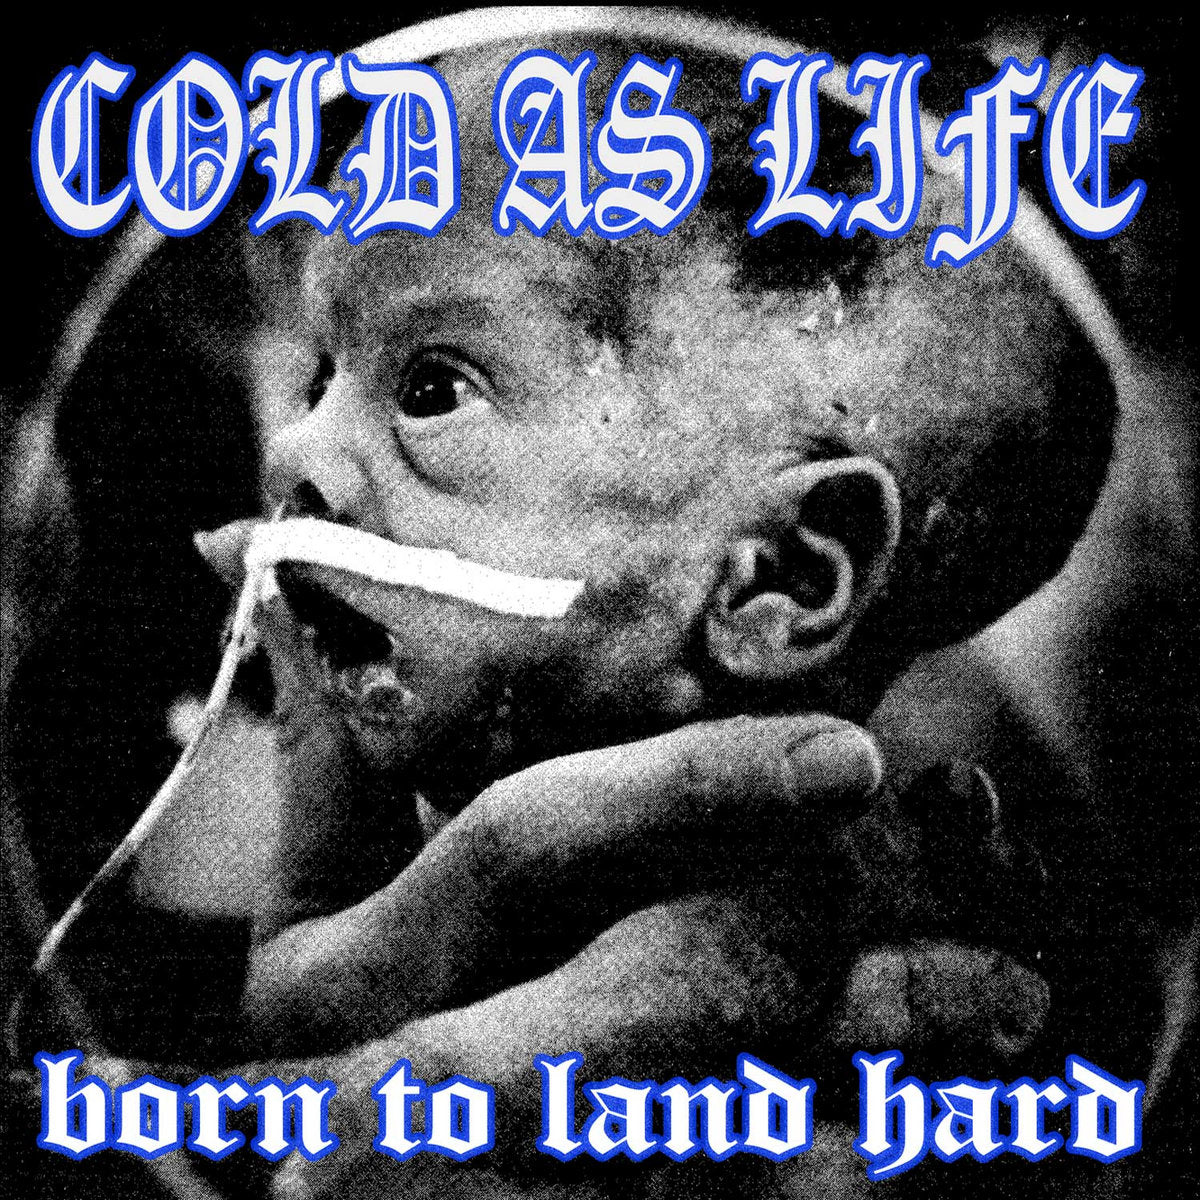 Cold As Life "Born To Land" LP